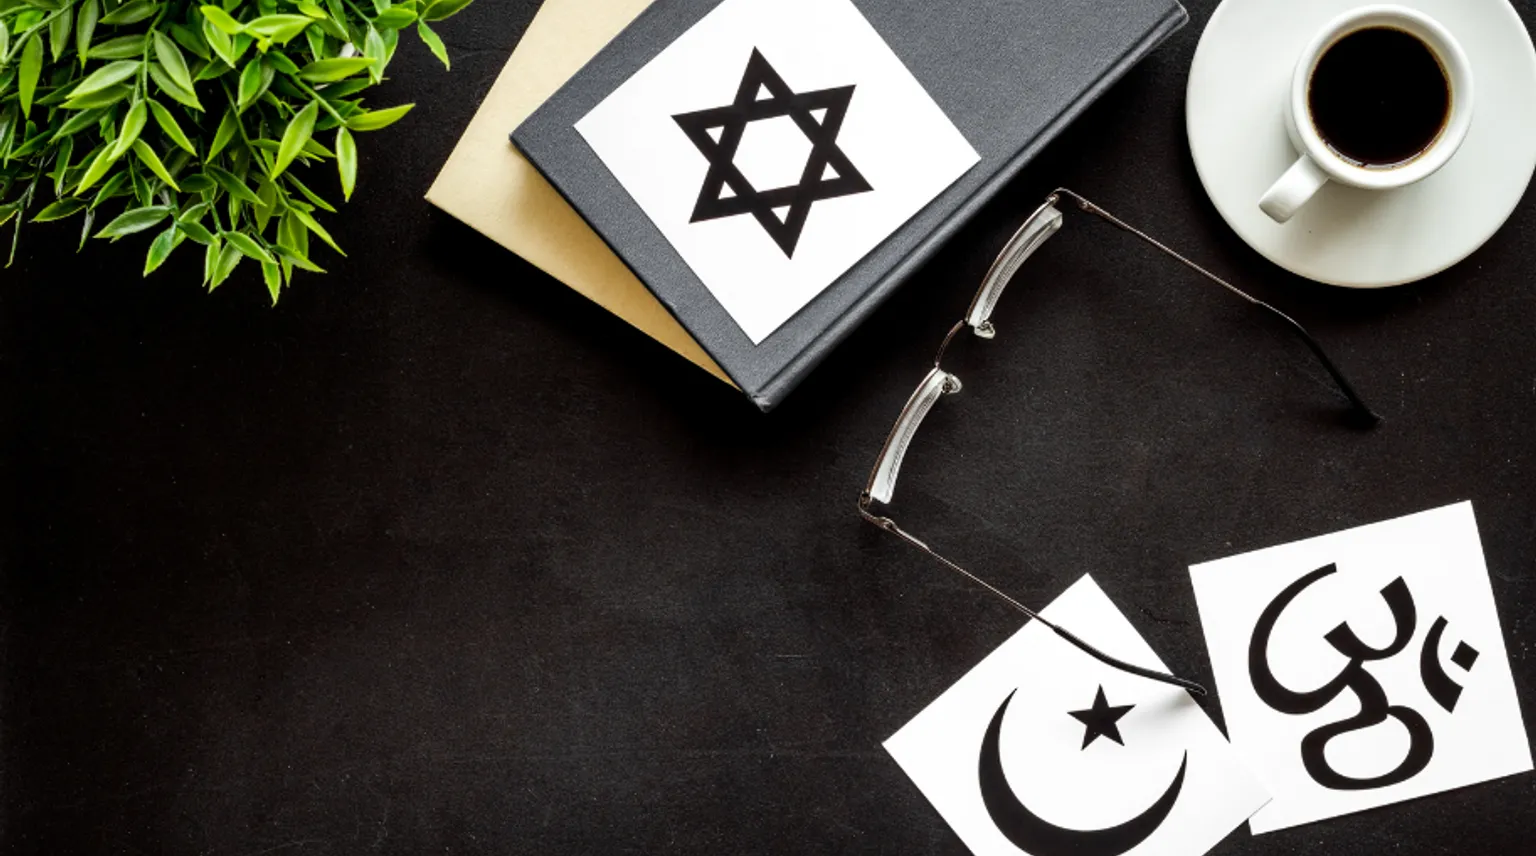 Does Islam forbid friendship with Jews and Christians?